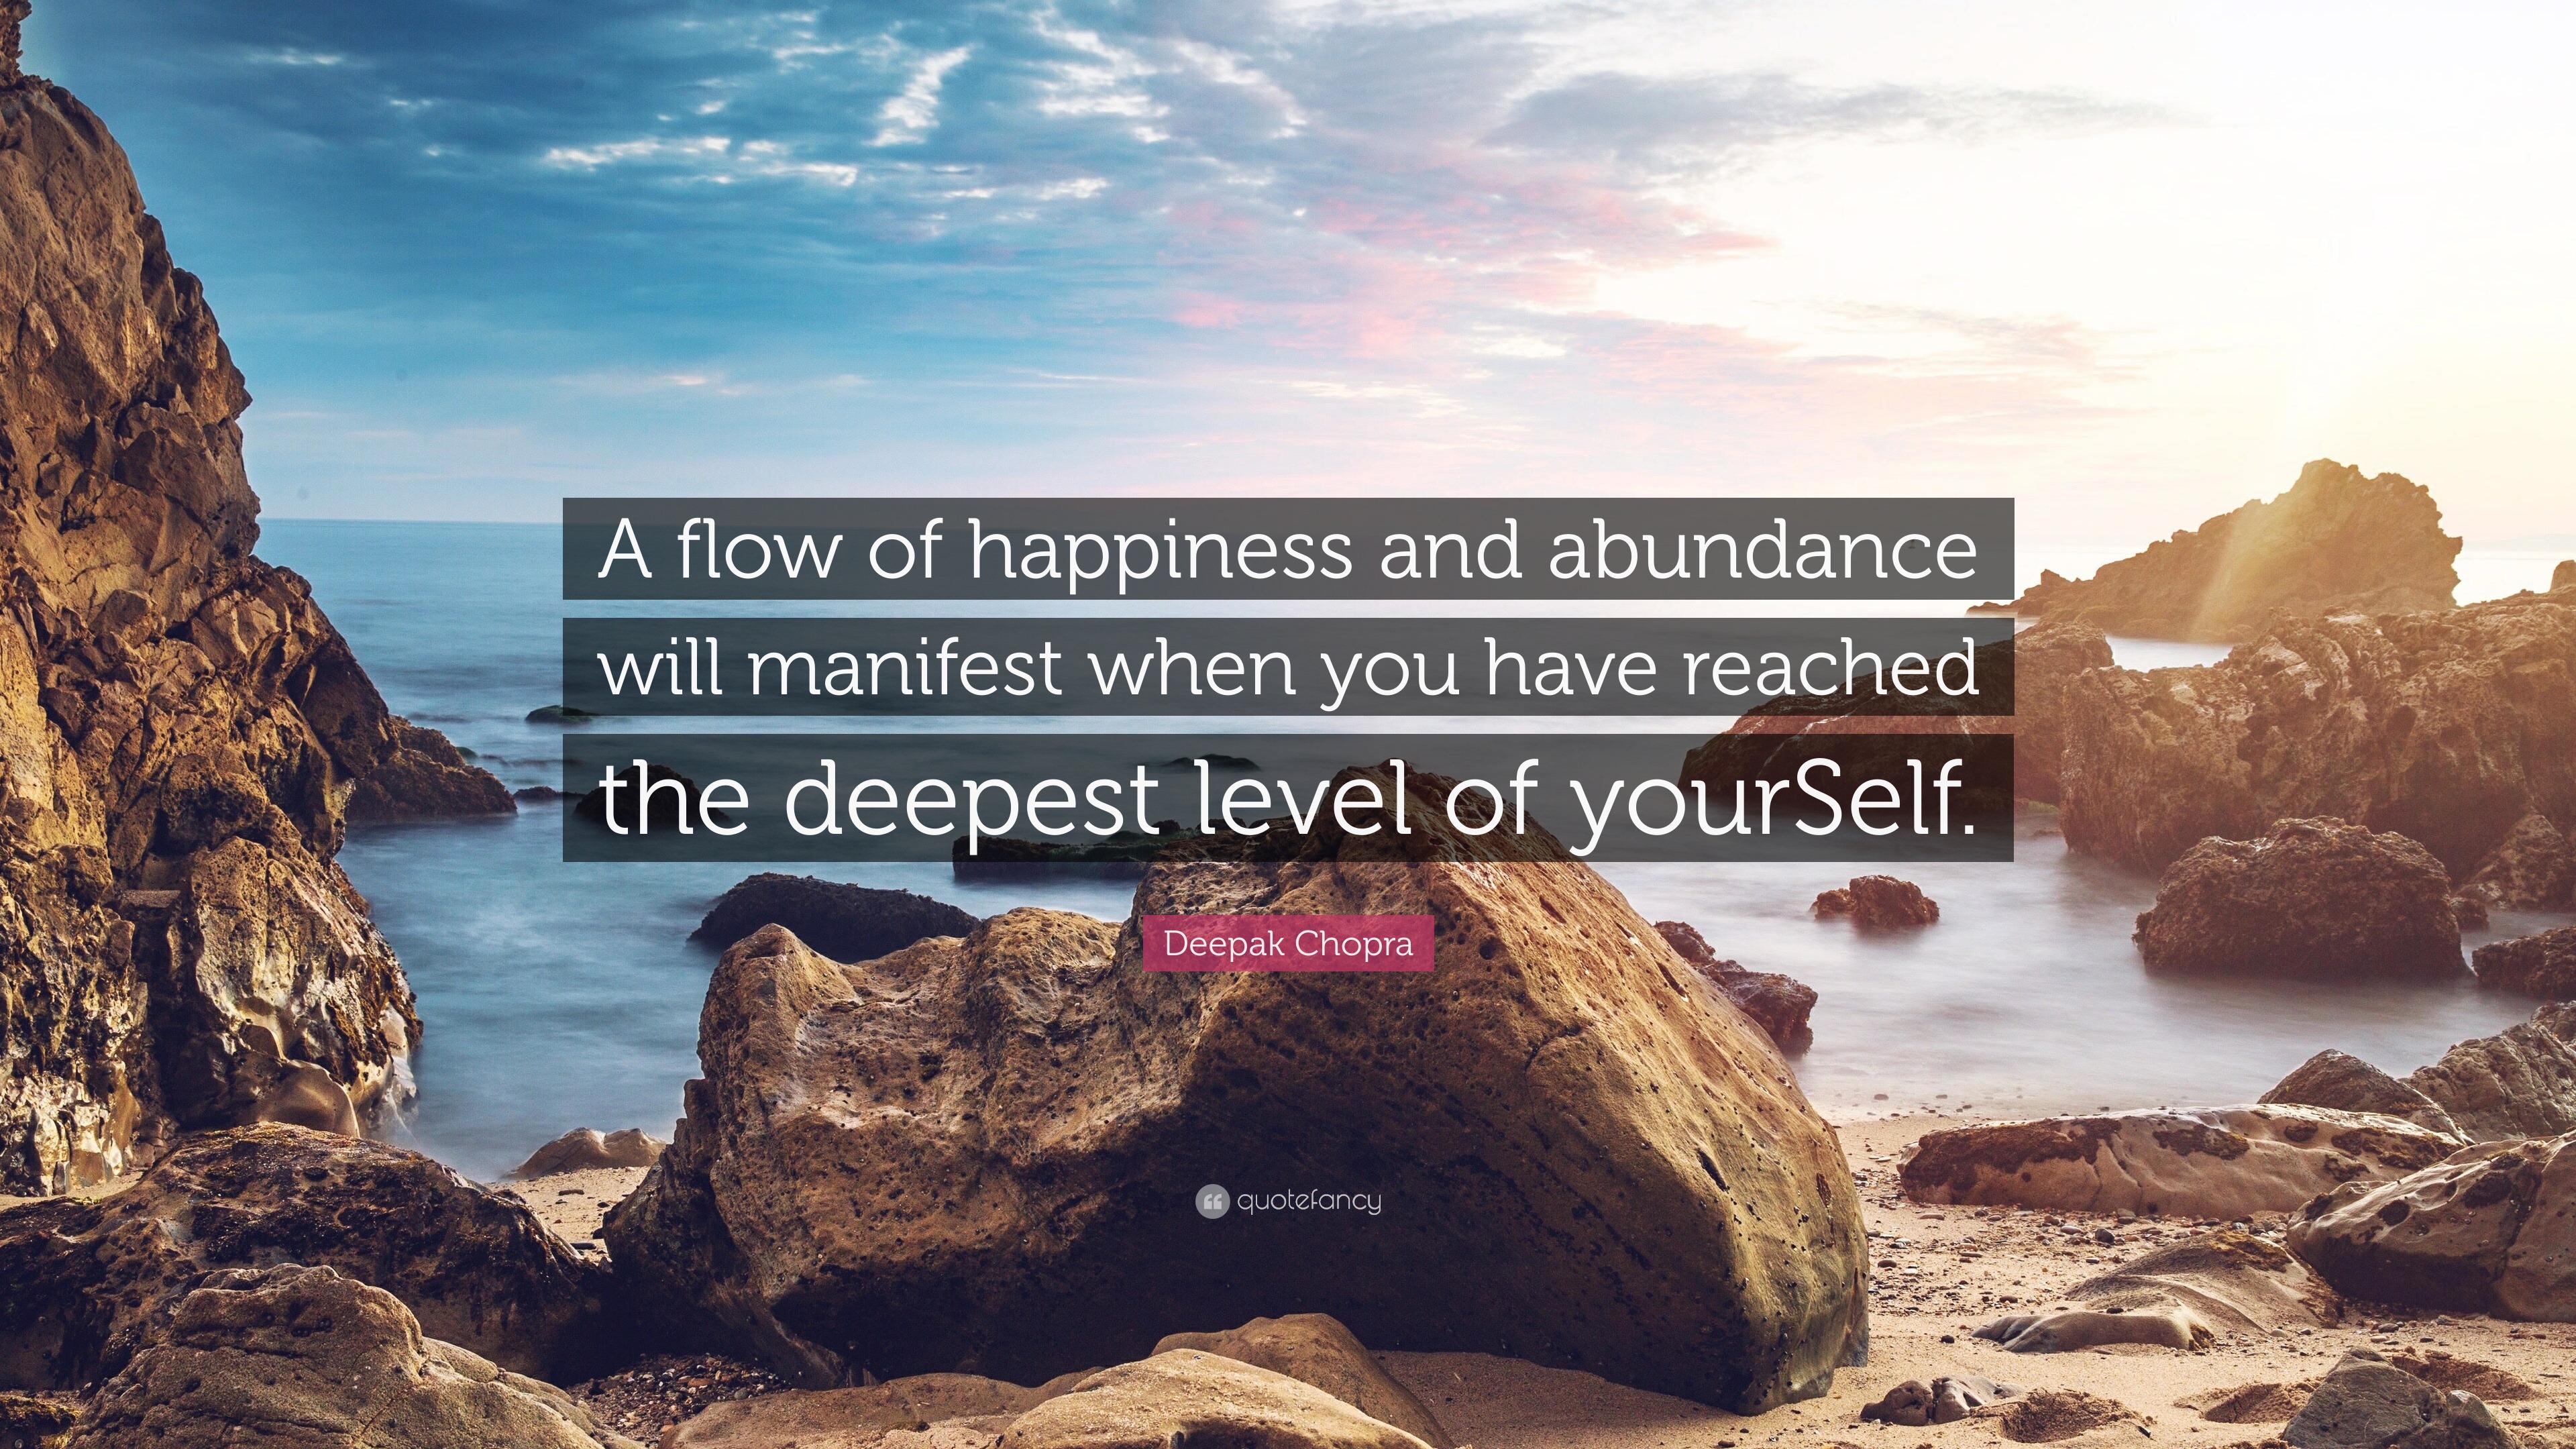 Deepak Chopra Quote A Flow Of Happiness And Abundance Will Manifest When You Have Reached The Deepest Level Of Yourself 7 Wallpapers Quotefancy